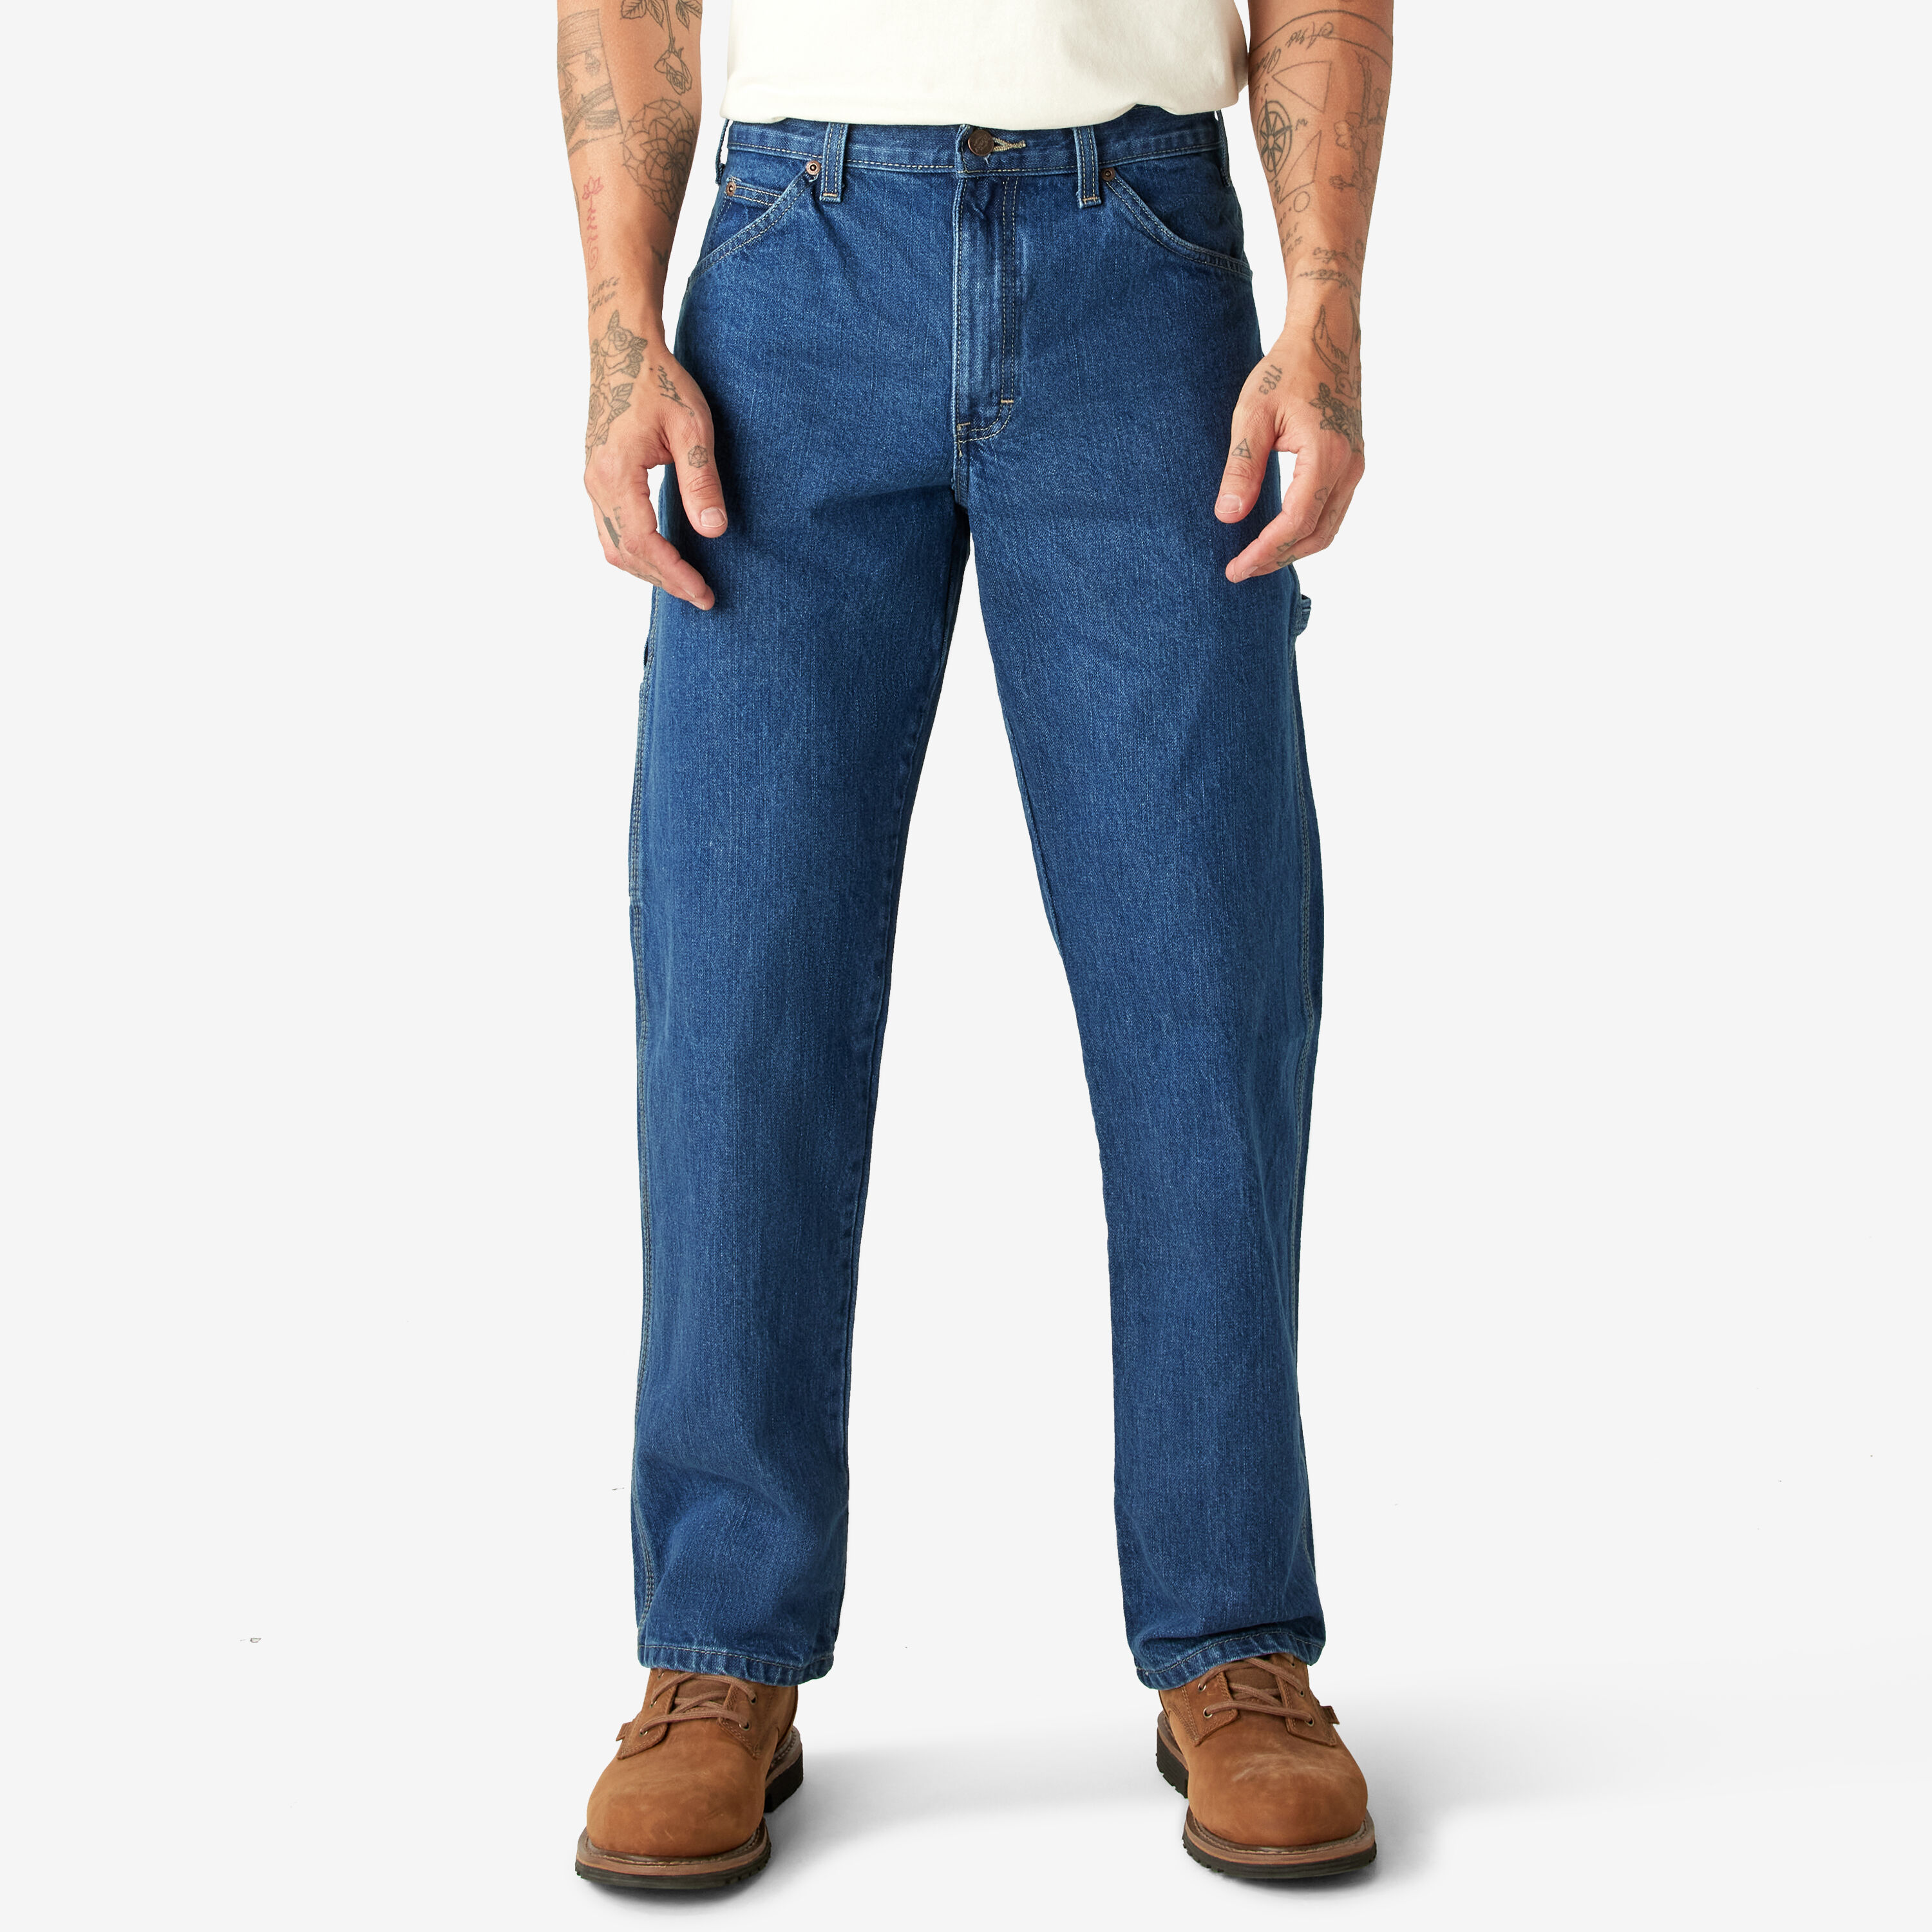 Men's Jeans - Work, Relaxed & Regular Fit Jeans | Dickies